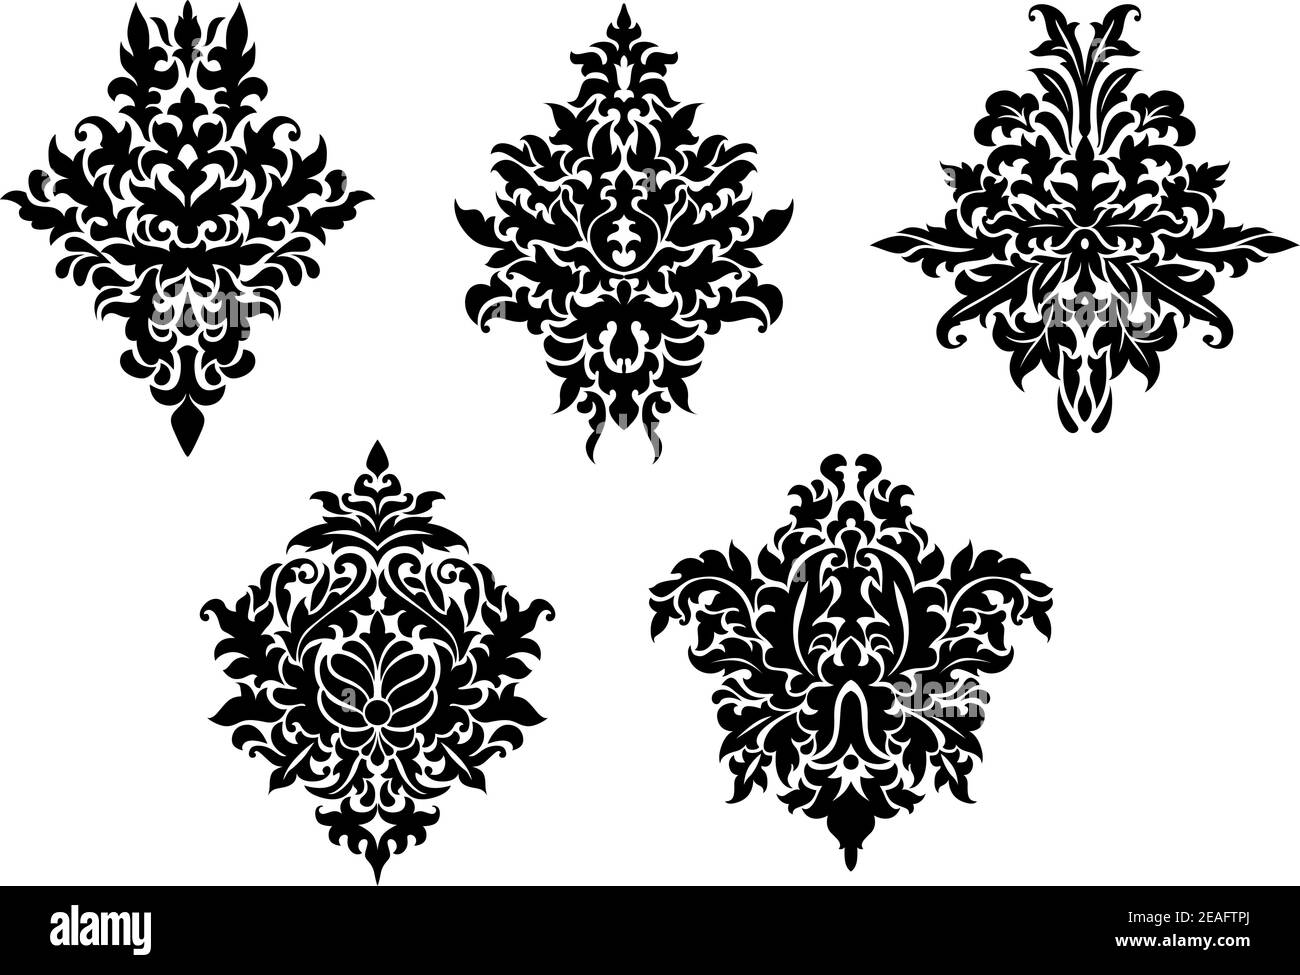 Set of five different foliate arabesque patterns in black and white with acanthus leaf motifs suitable for damask textile and print elements Stock Vector